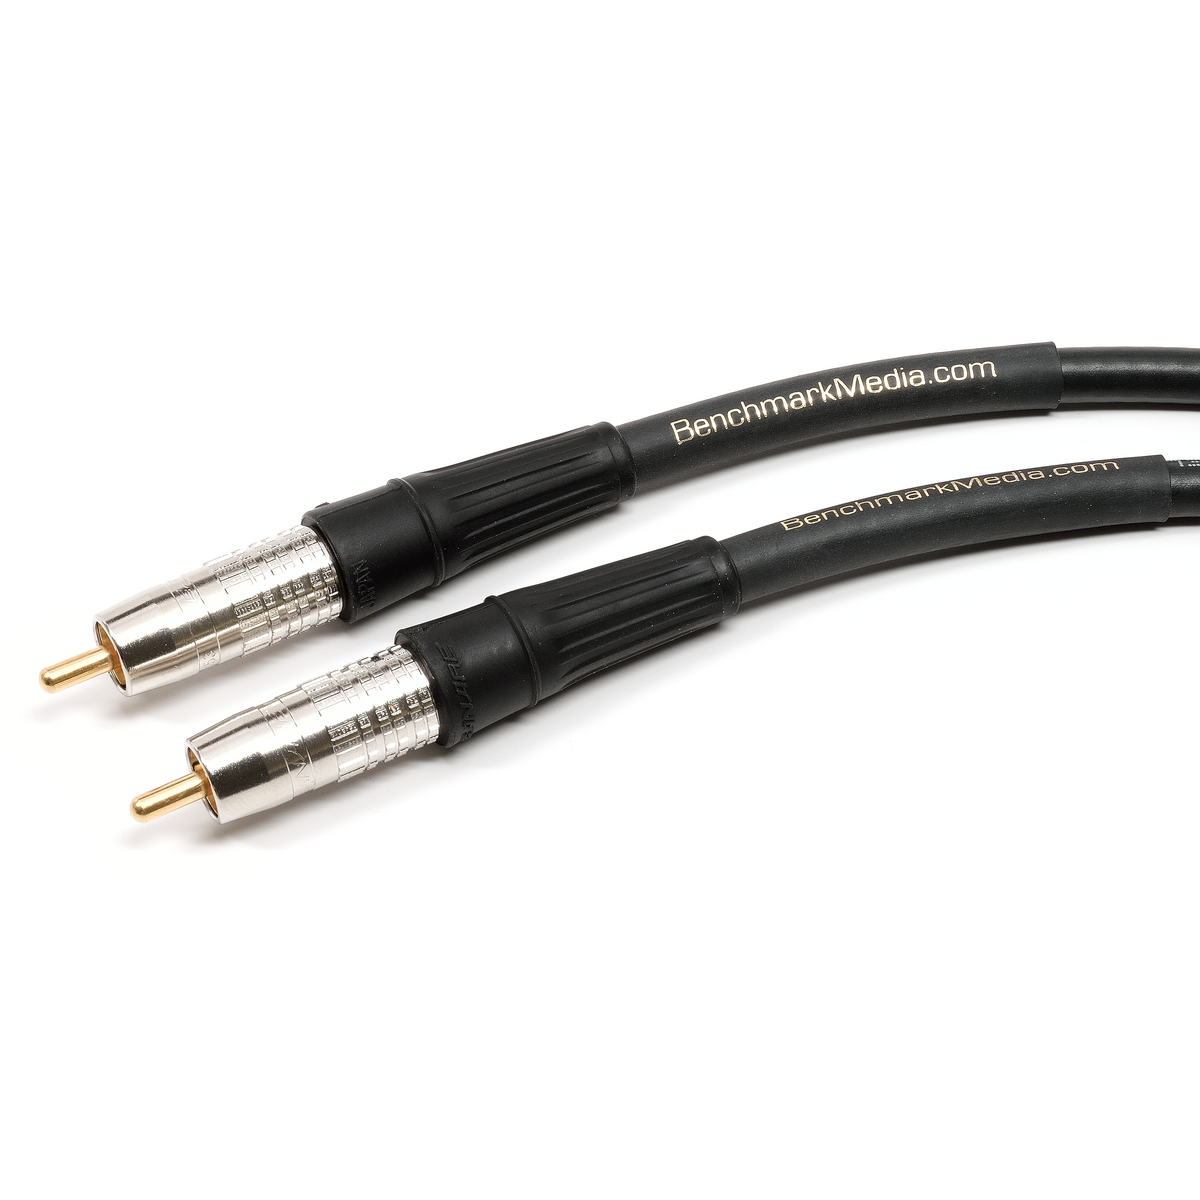 Coaxial digital audio cable • Compare best prices »